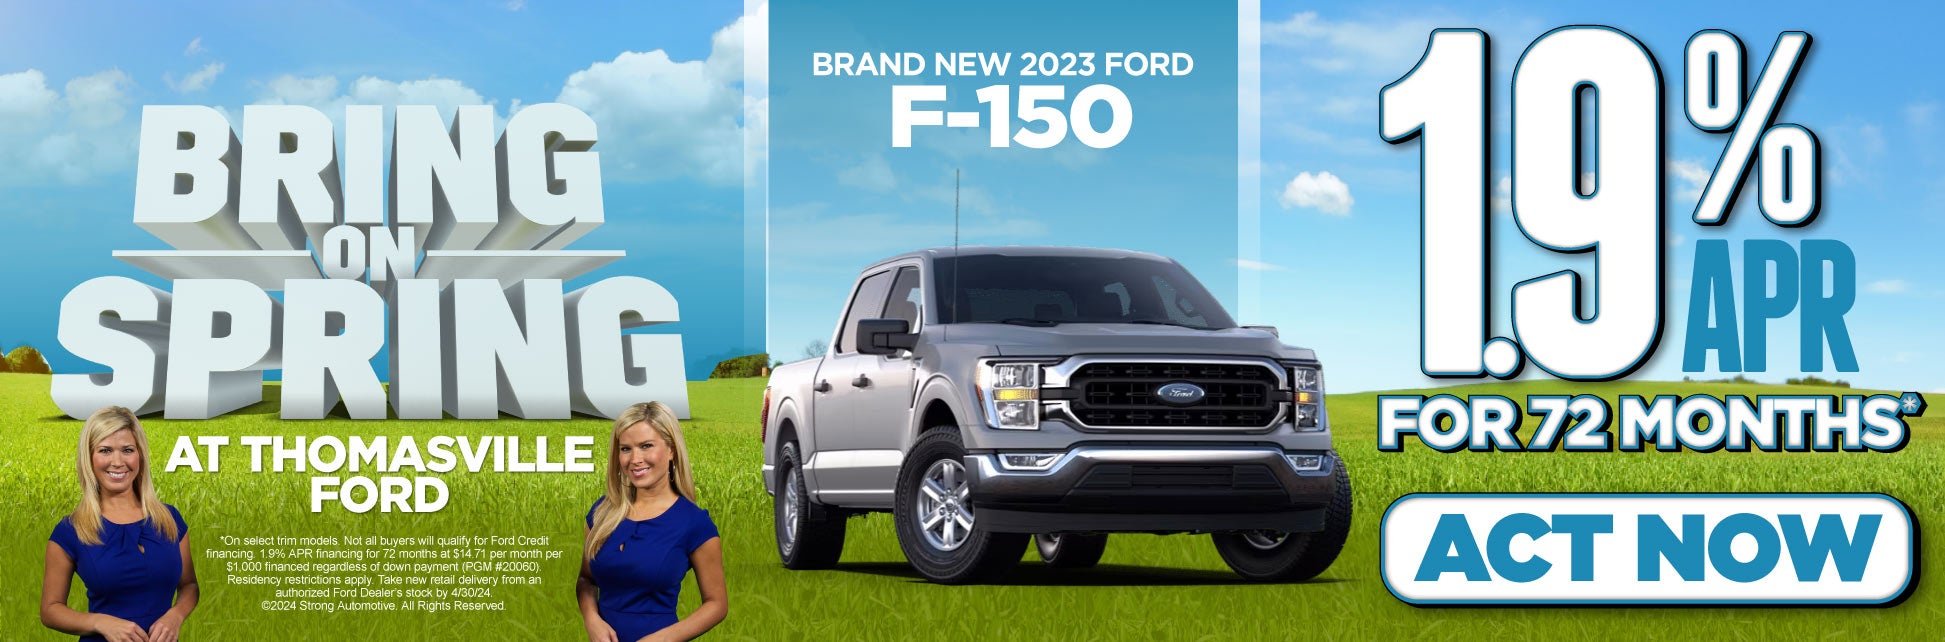 2023 Ford F-150 - 1.9% APR for 72 months - Act Now